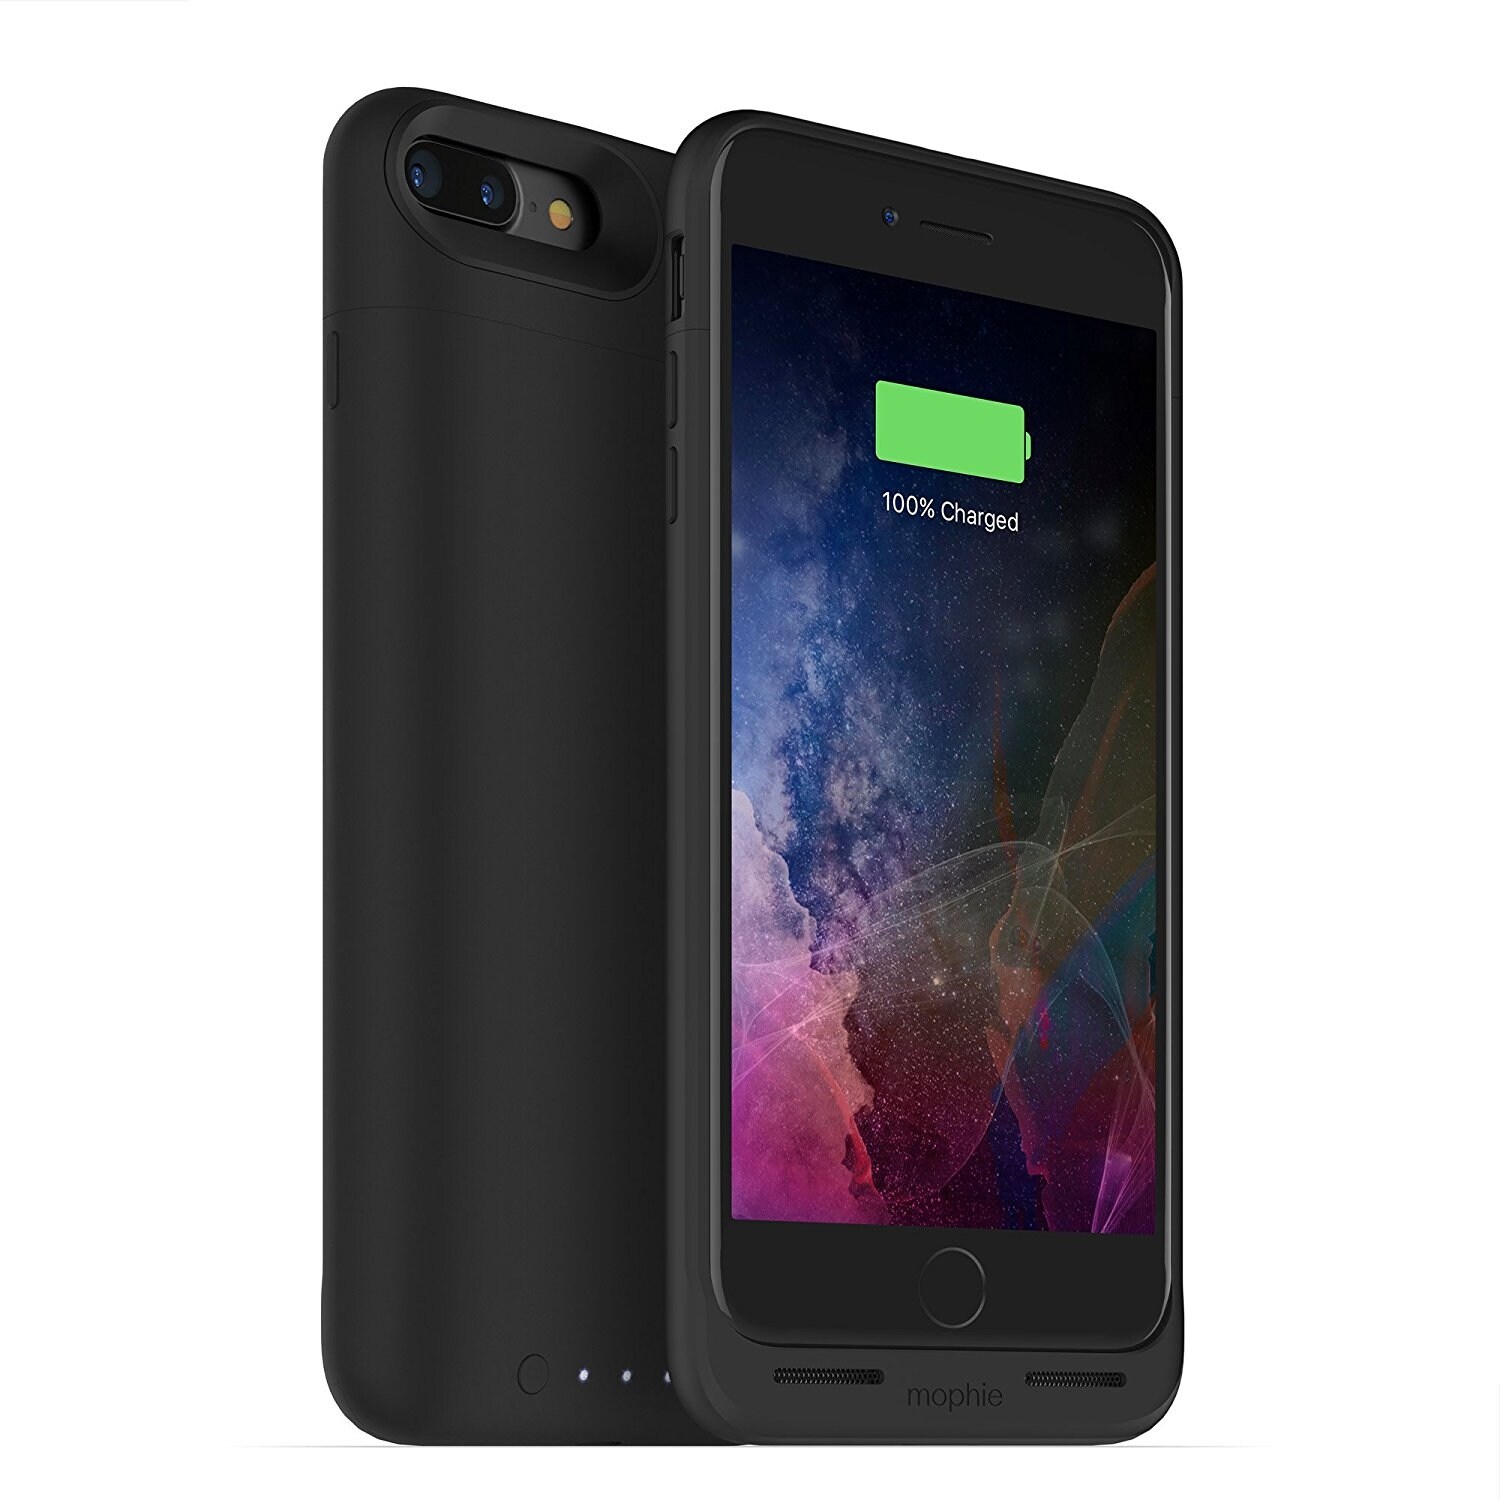 Mophie Juice Pack Air - Wireless Charging Protective Battery Pack Case for iPhone 7 Plus - Black